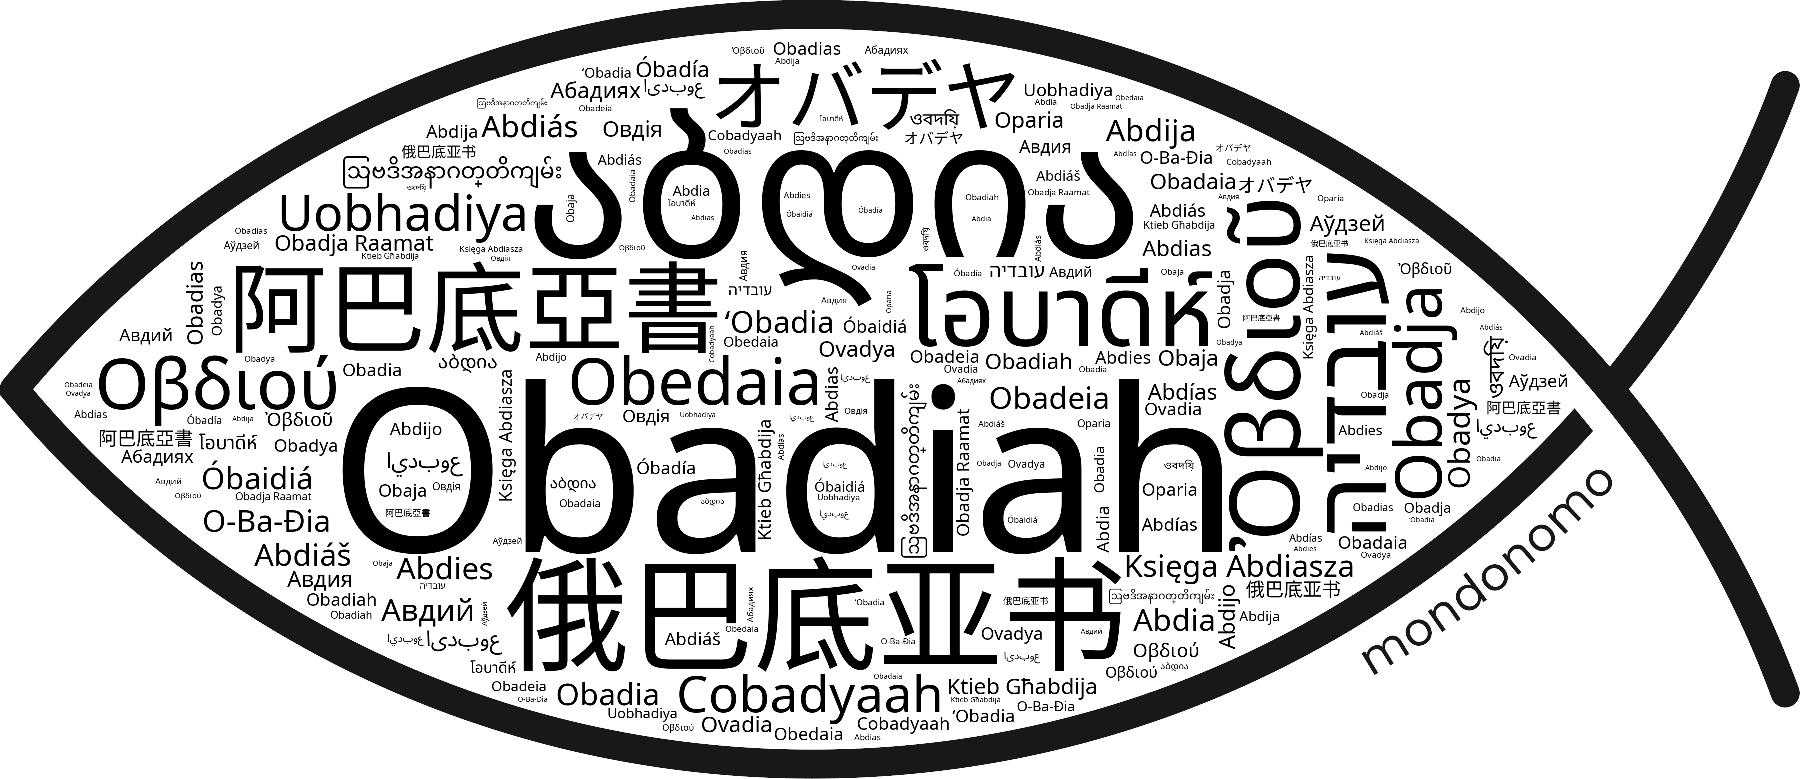 Name Obadiah in the world's Bibles